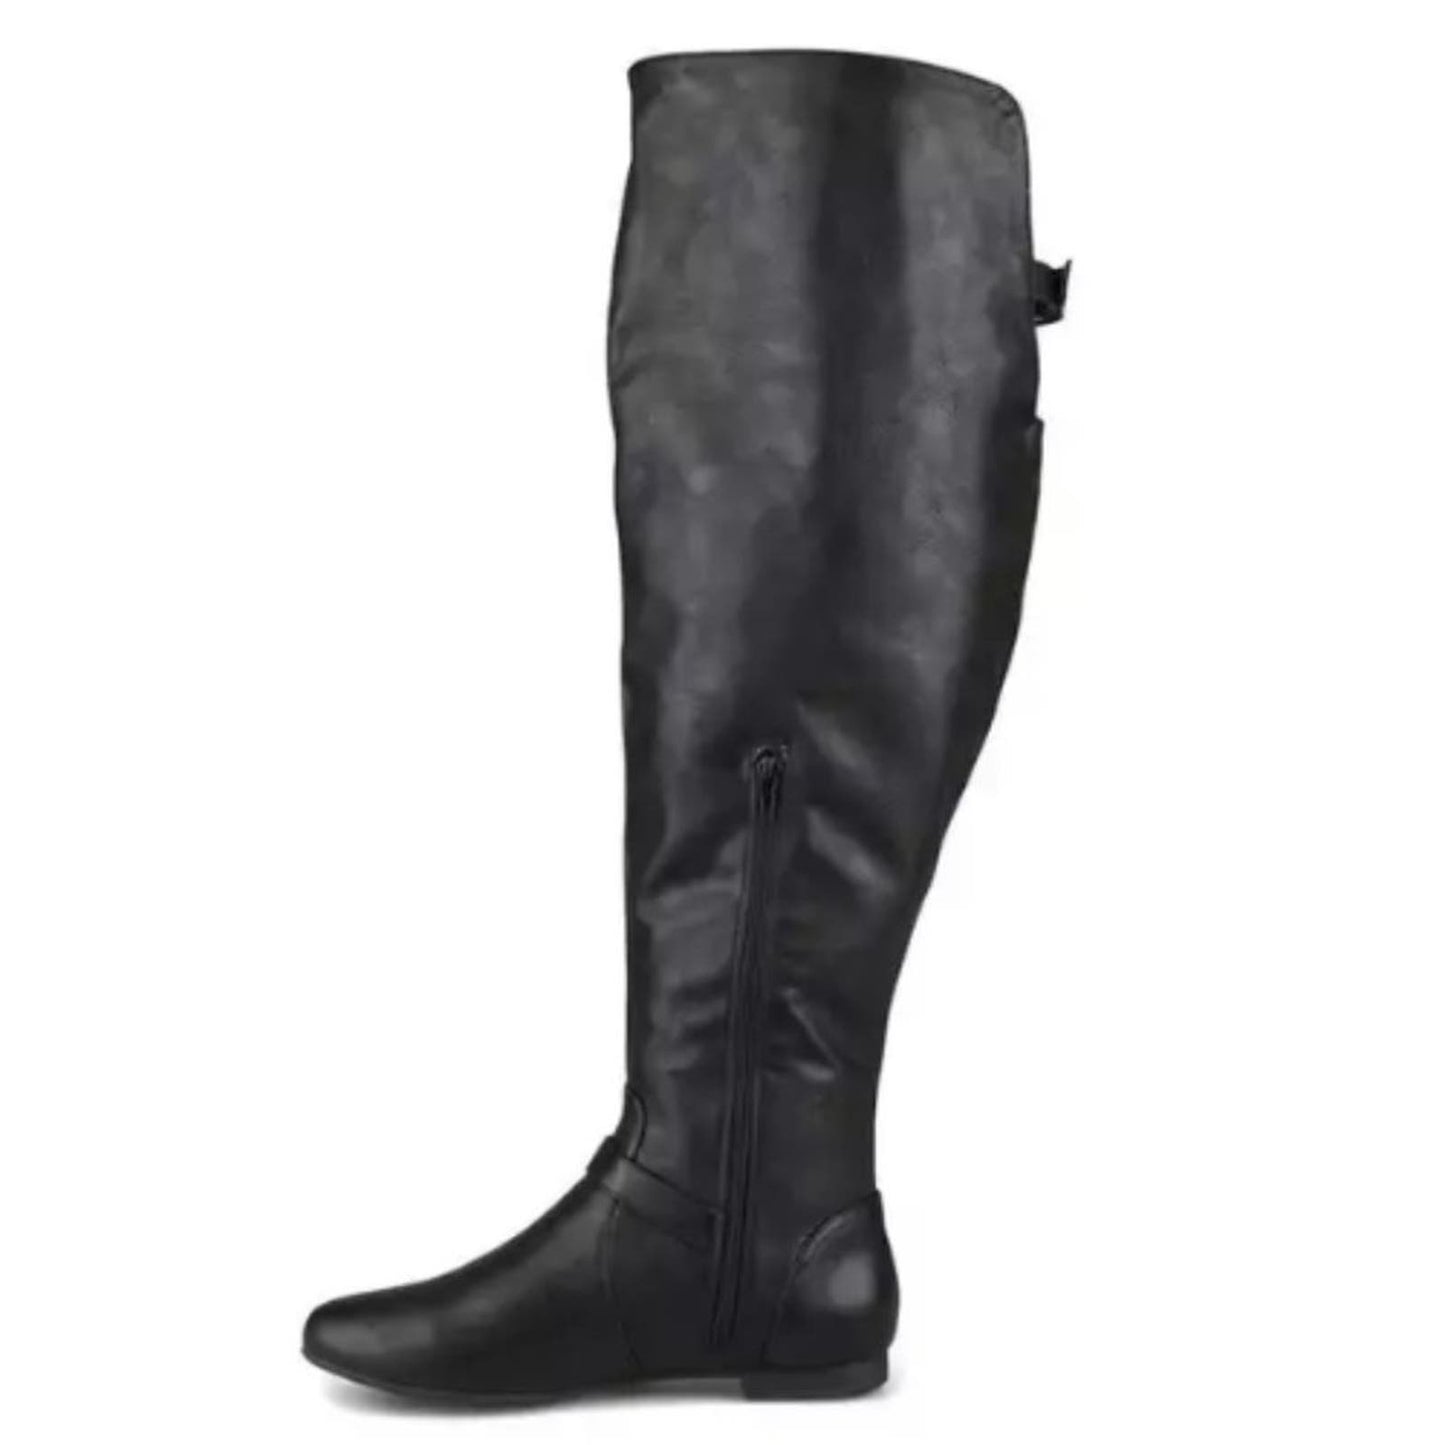 C.C. Collection Loft Over-The-Knee Boots in Black NEW Size 10